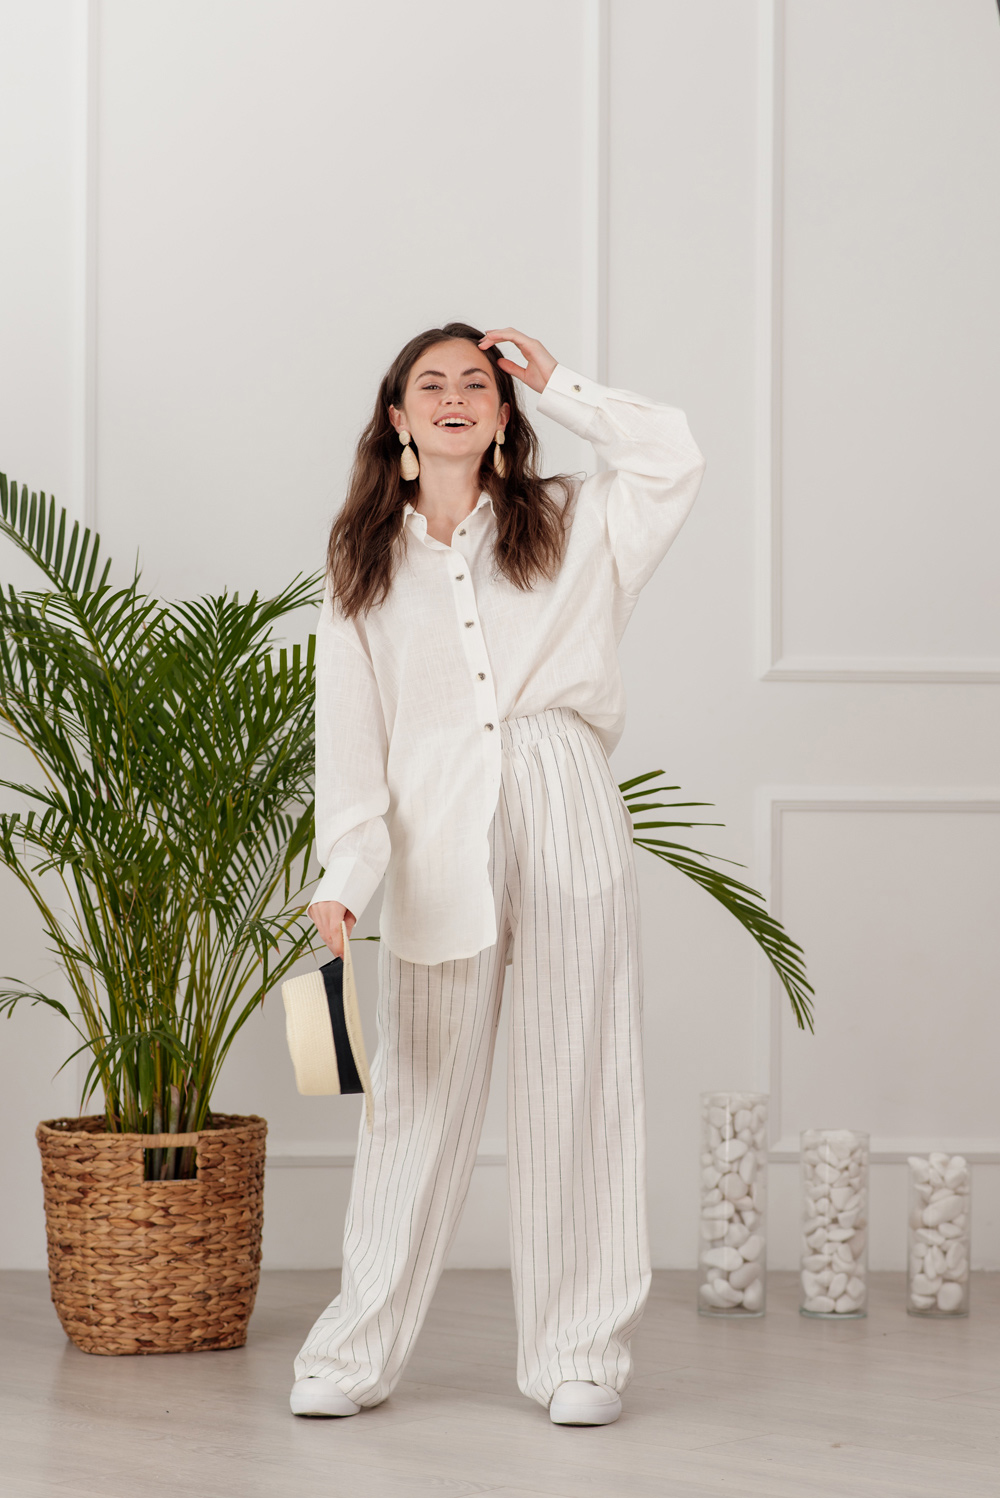 White linen suit with striped pants